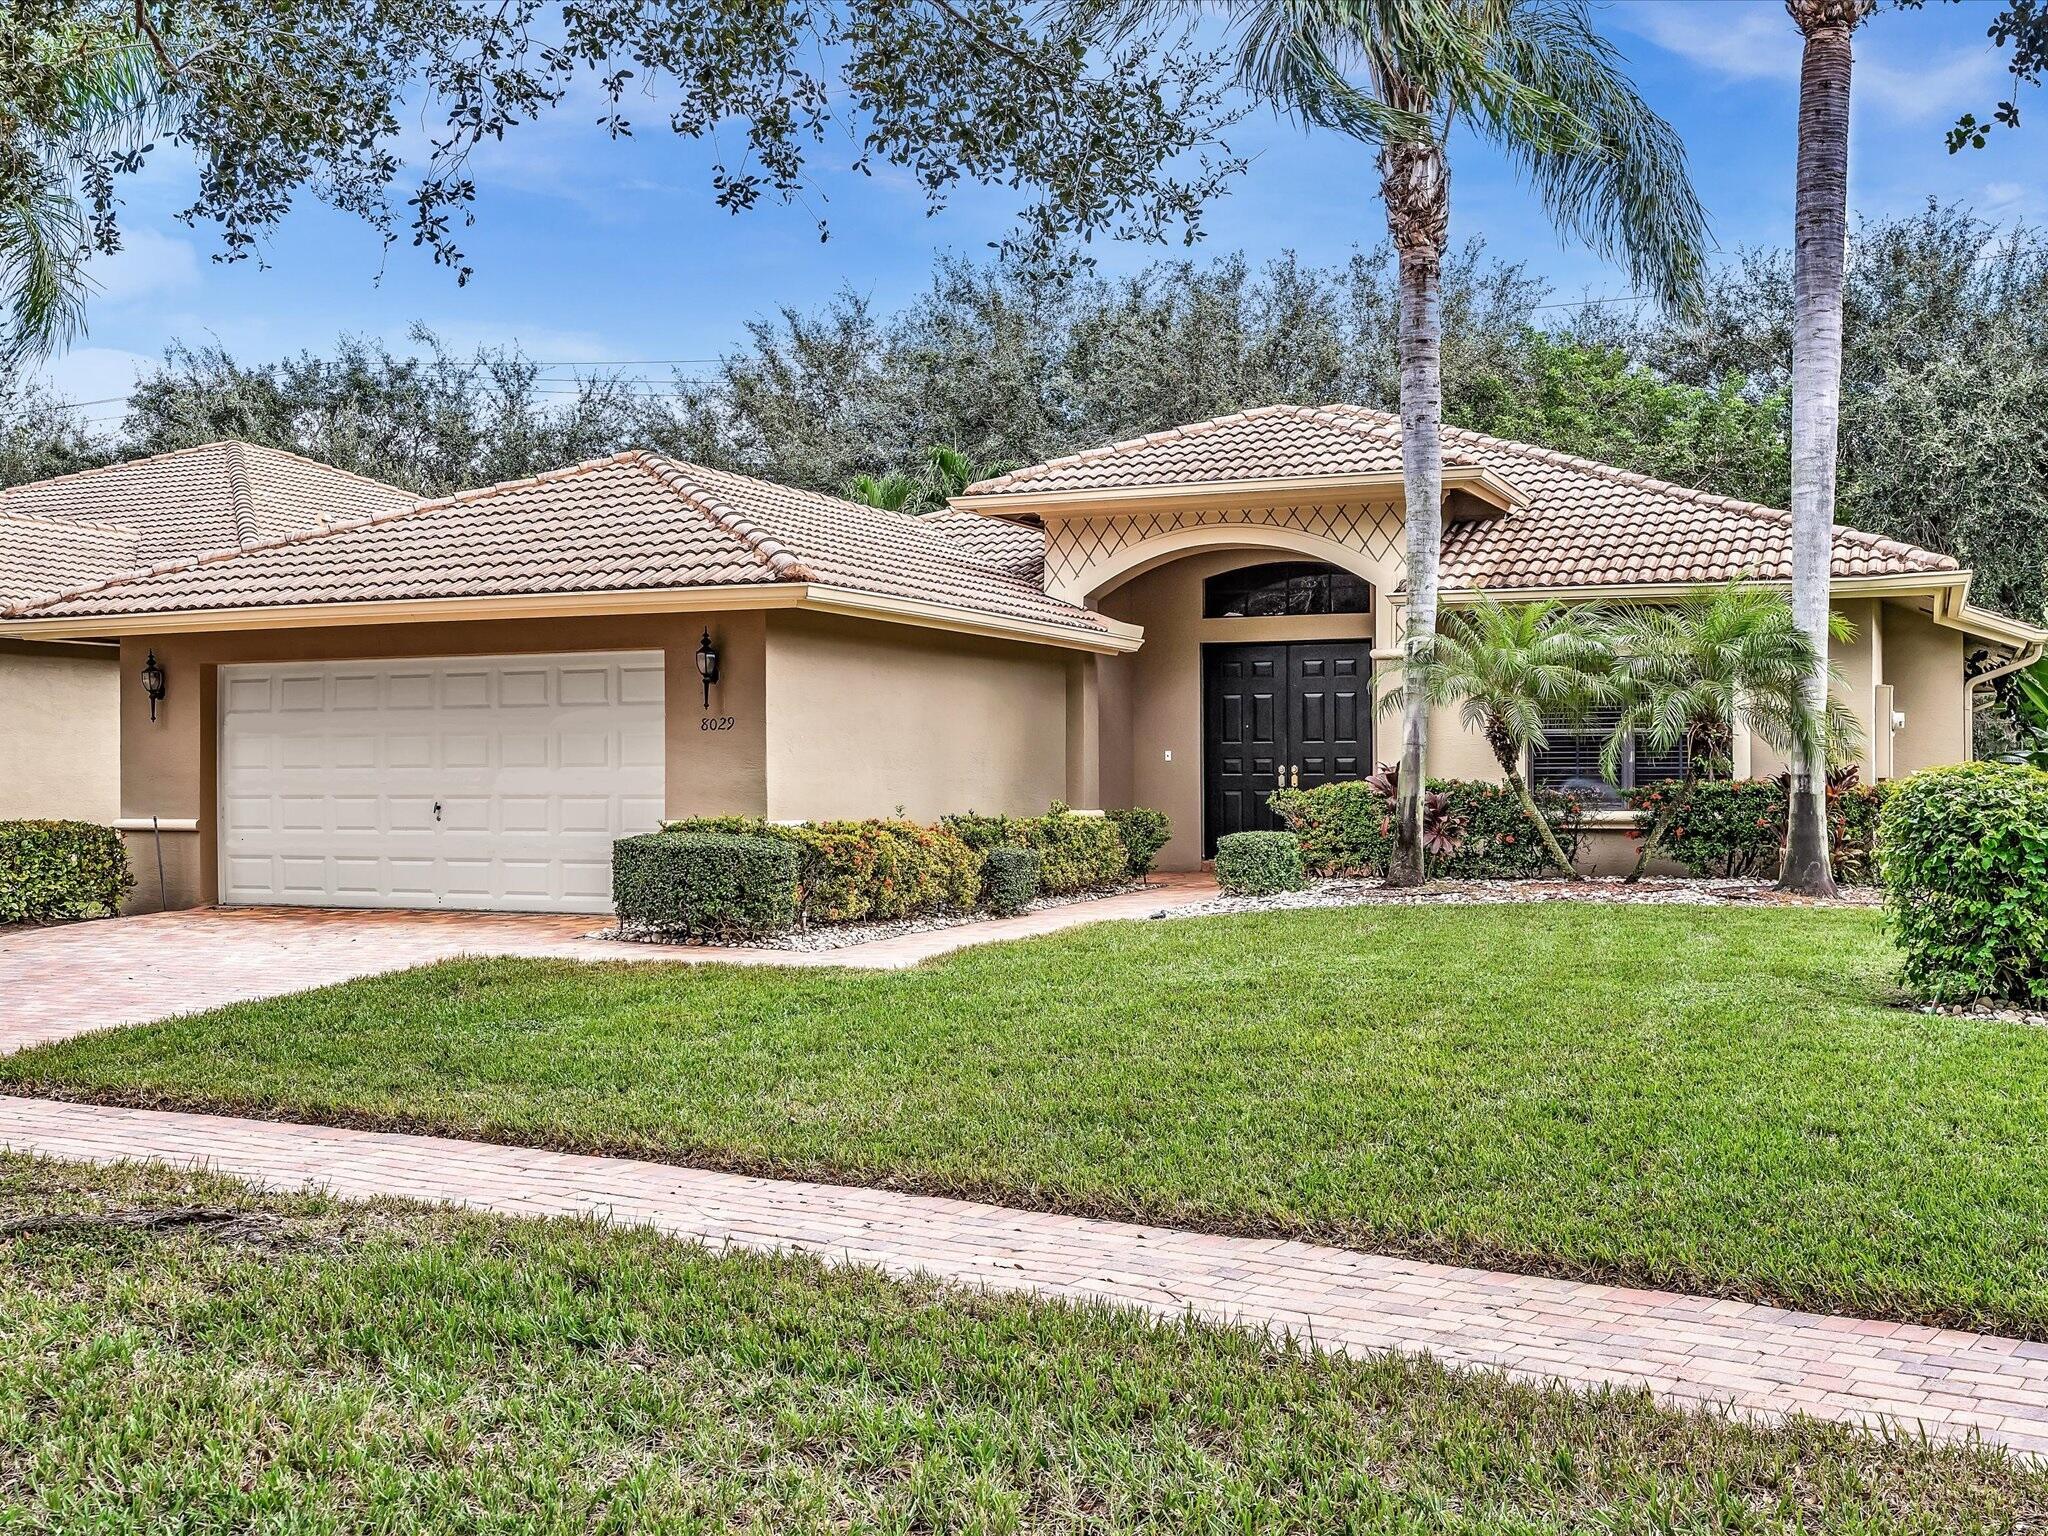 Presenting a beautiful 3/3 Venezia model located in Boynton's manned-gated community of Tivoli Reserve! This popular floor plan features a triple-split layout offering owners & guests complete privacy while providing an expansive Great Room thats centrally located and opens to a covered & screened brick paver patio. The home is situated on one of the communities full-sized private lots (not zero lot-line). Features include an upgraded eat-in Island kitchen with 42'' wood cabinetry, pull-outs & granite countertops, a large primary suite that includes two walk-In closets and an enormous bathroom with soaking tub, separate shower and his/hers countertops & sinks. Other upgrades include custom built-out closets, decorator window treatments & panel storm protection. Offered fully furnished.